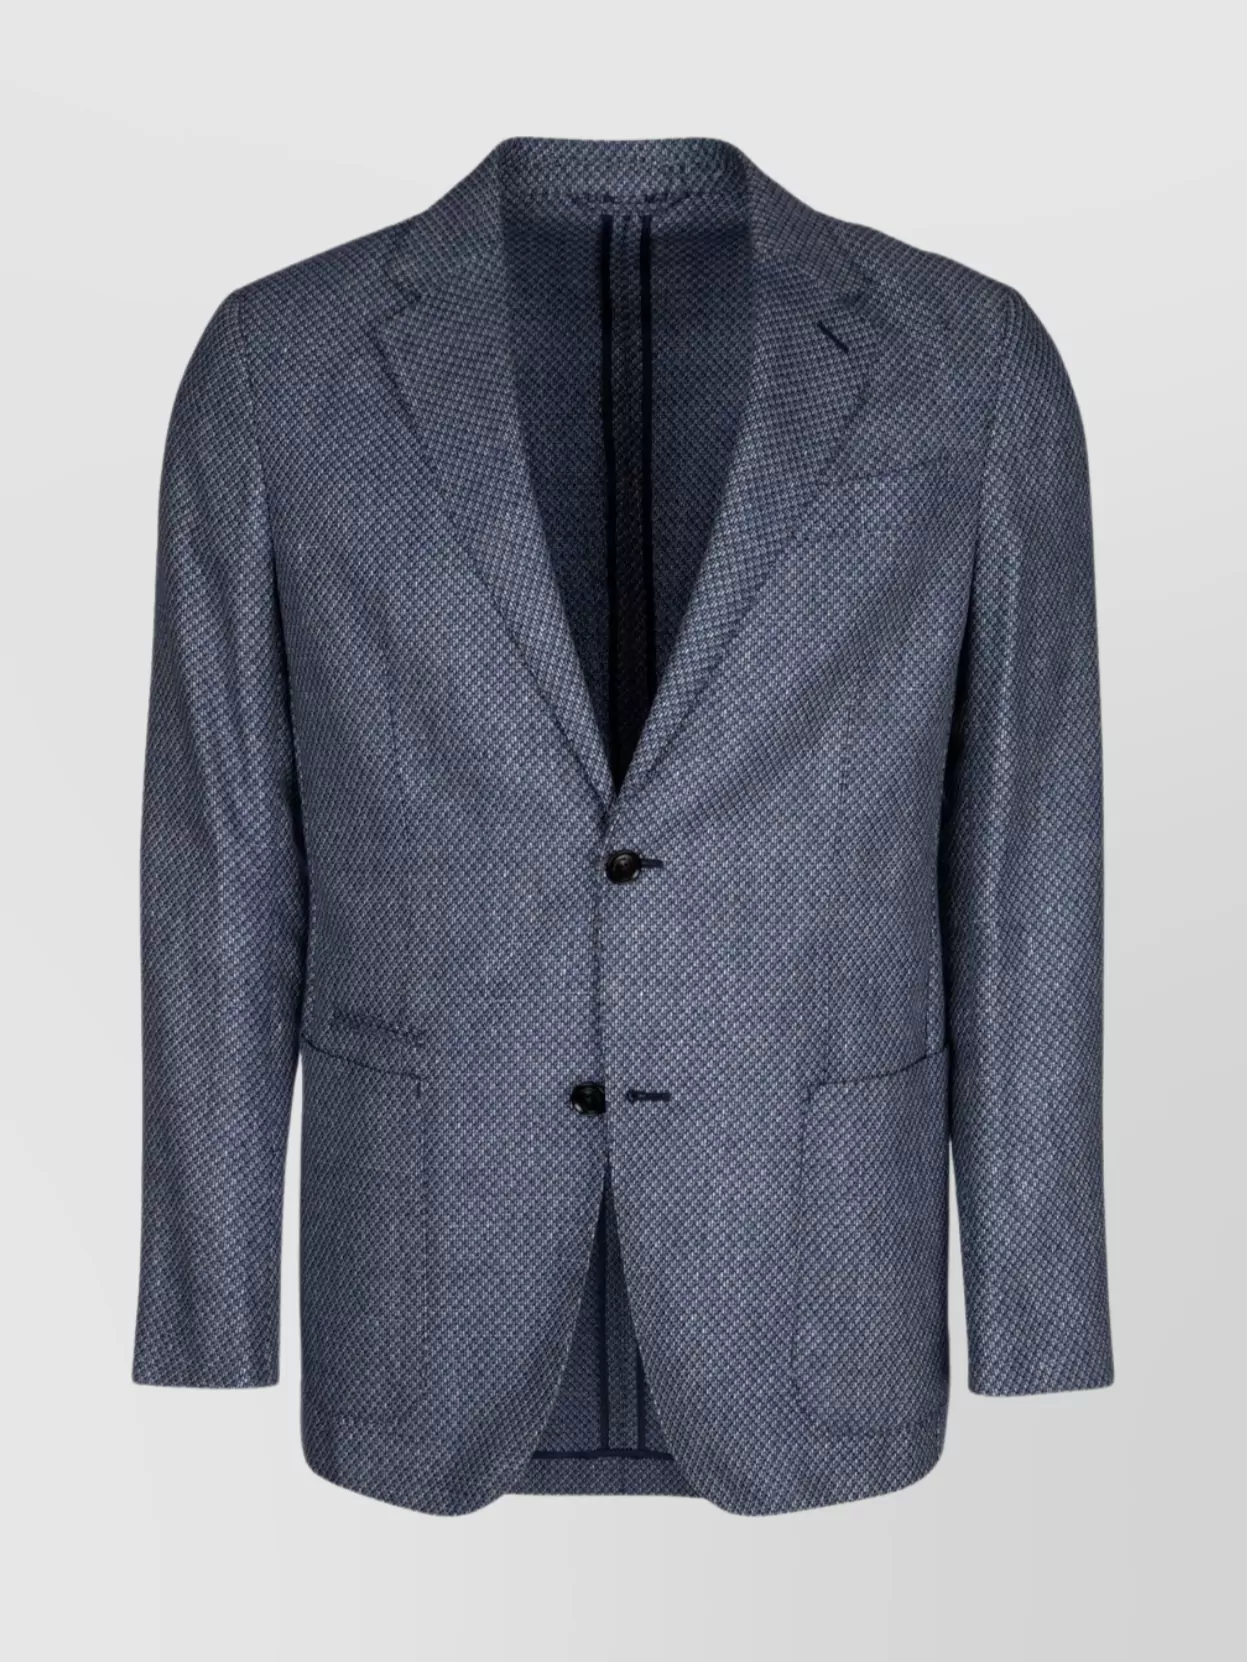 Ermenegildo Zegna Tailored Jacket With Double Vent And Notch Lapel In Gray